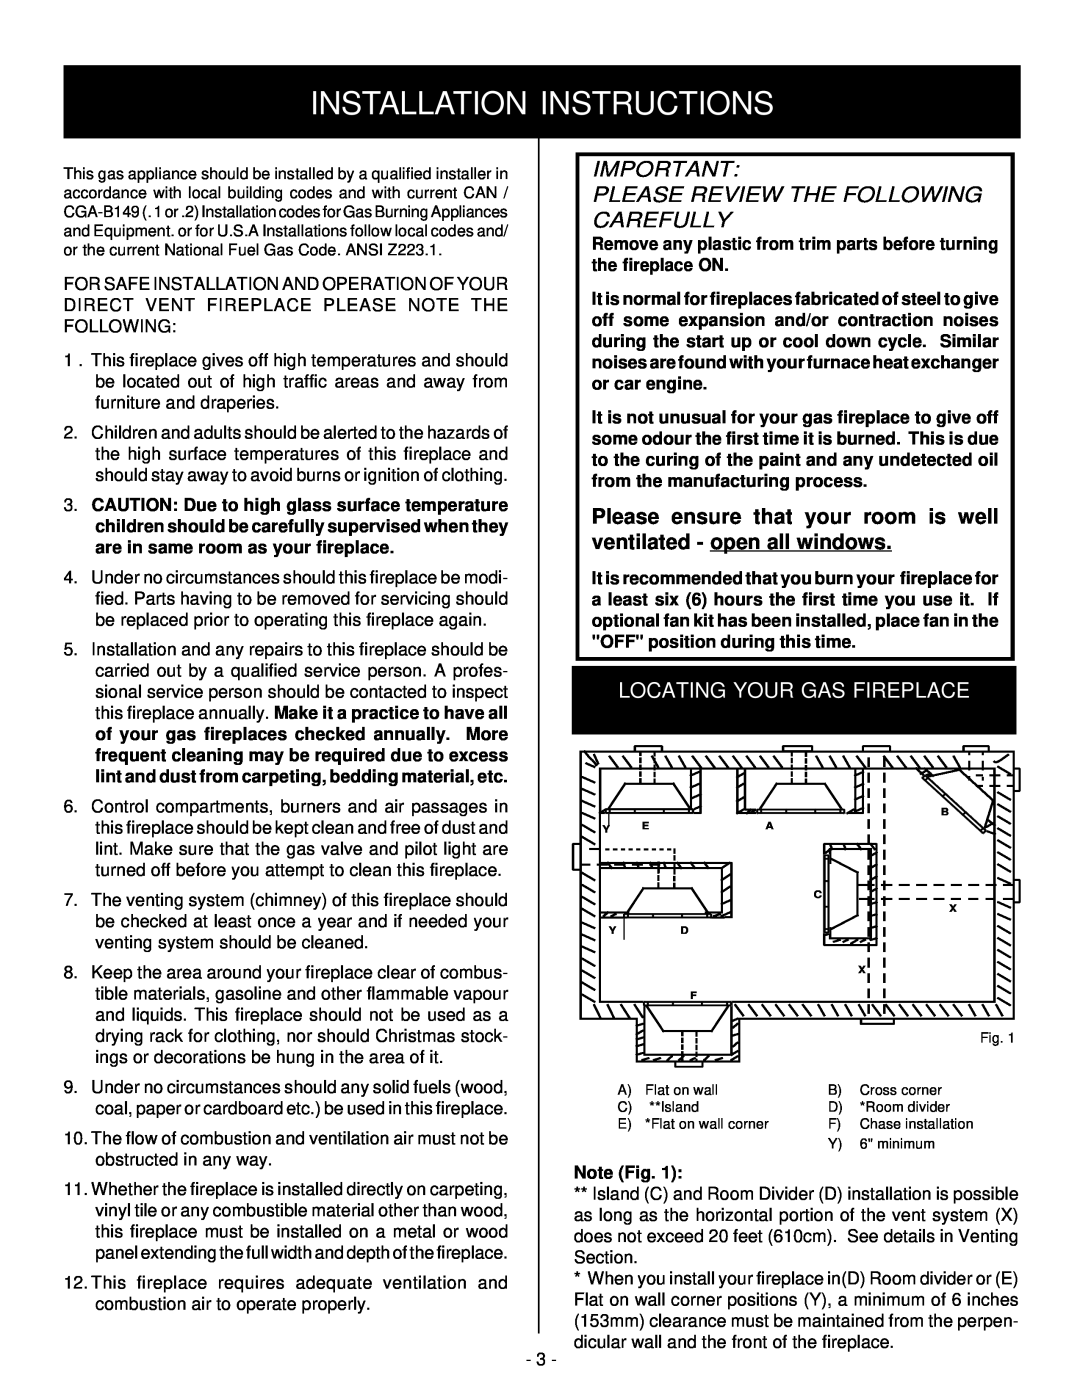 Vermont Casting BHDR36 Installation Instructions, Please ensure that your room is well, ventilated - open all windows 